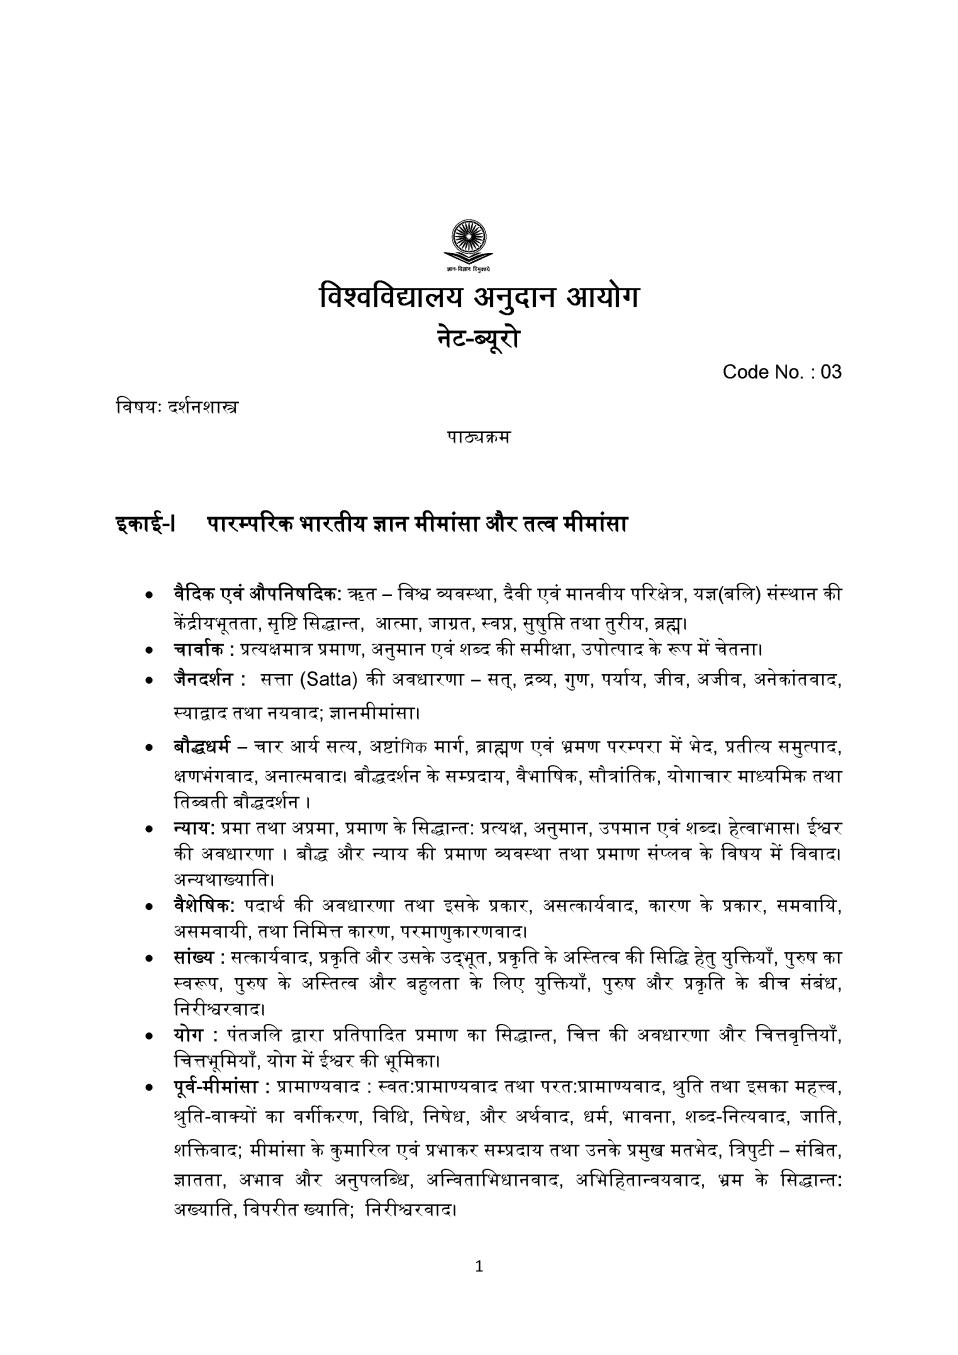 UGC NET Syllabus for Philosophy 2020 in Hindi - Page 1